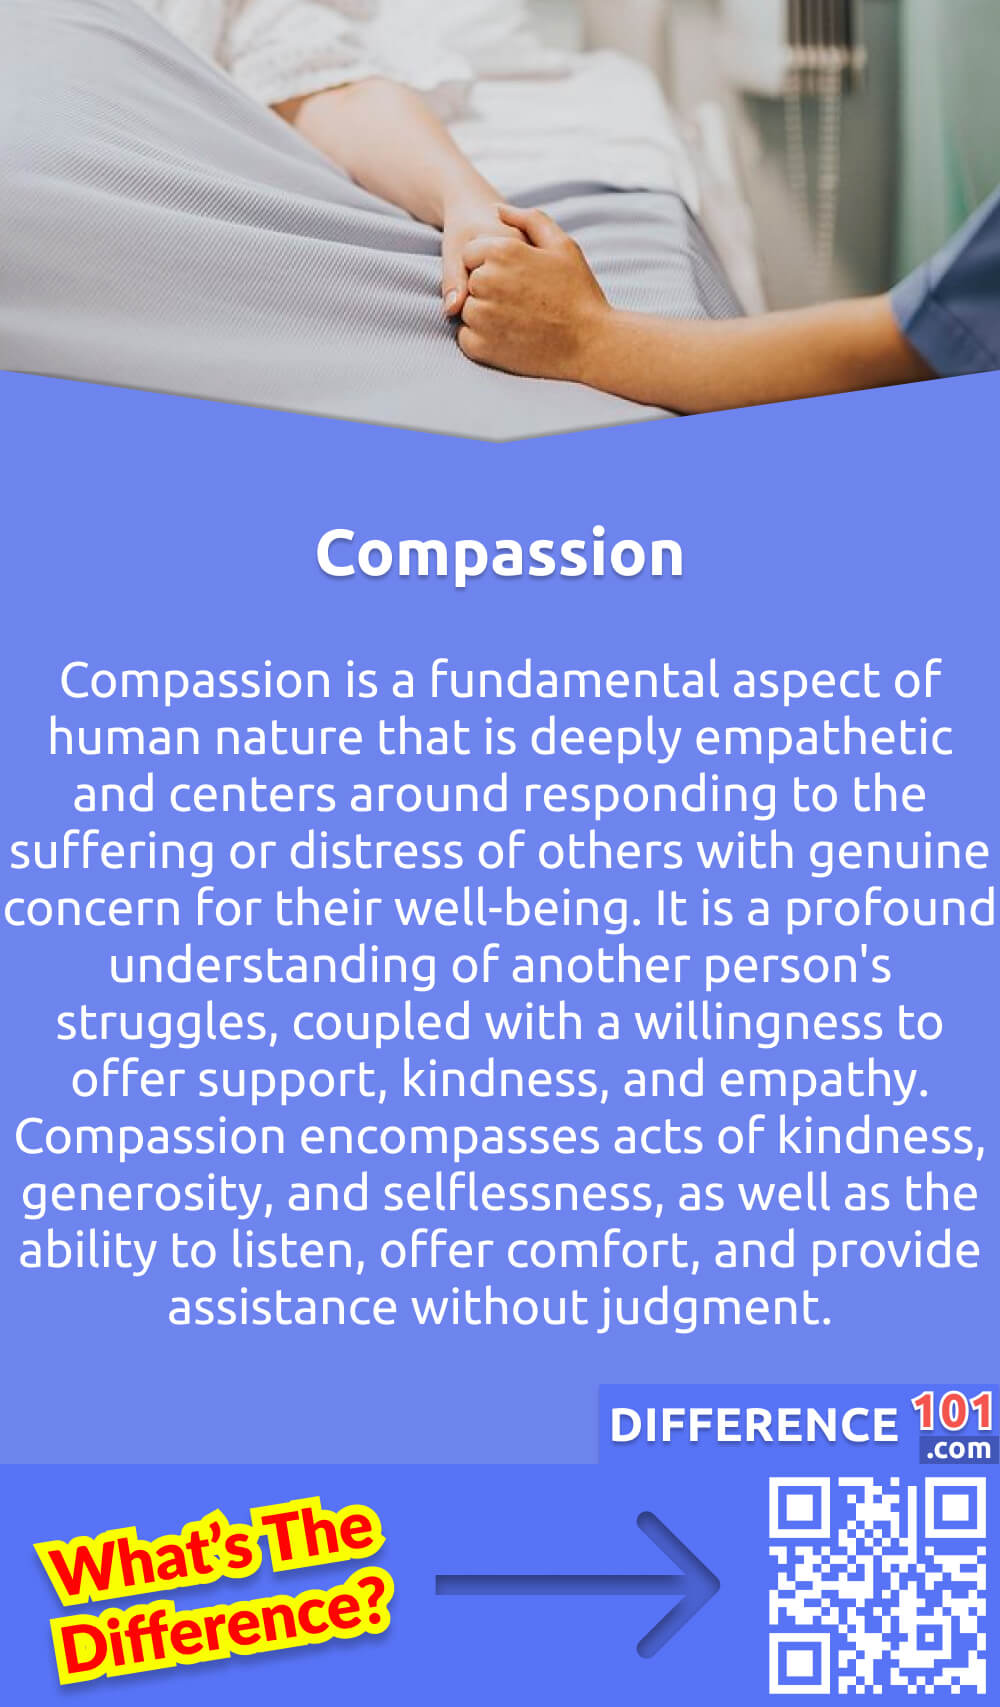 What Is Compassion? Compassion is a fundamental aspect of human nature that is deeply empathetic and centers around responding to the suffering or distress of others with genuine concern for their well-being. It is a profound understanding of another person's struggles, coupled with a willingness to offer support, kindness, and empathy. Compassion encompasses acts of kindness, generosity, and selflessness, as well as the ability to listen, offer comfort, and provide assistance without judgment. It is a universal virtue that promotes human connection, understanding, and a sense of shared humanity, and can be expressed in various contexts, including personal relationships, caregiving, community service, and humanitarian efforts.